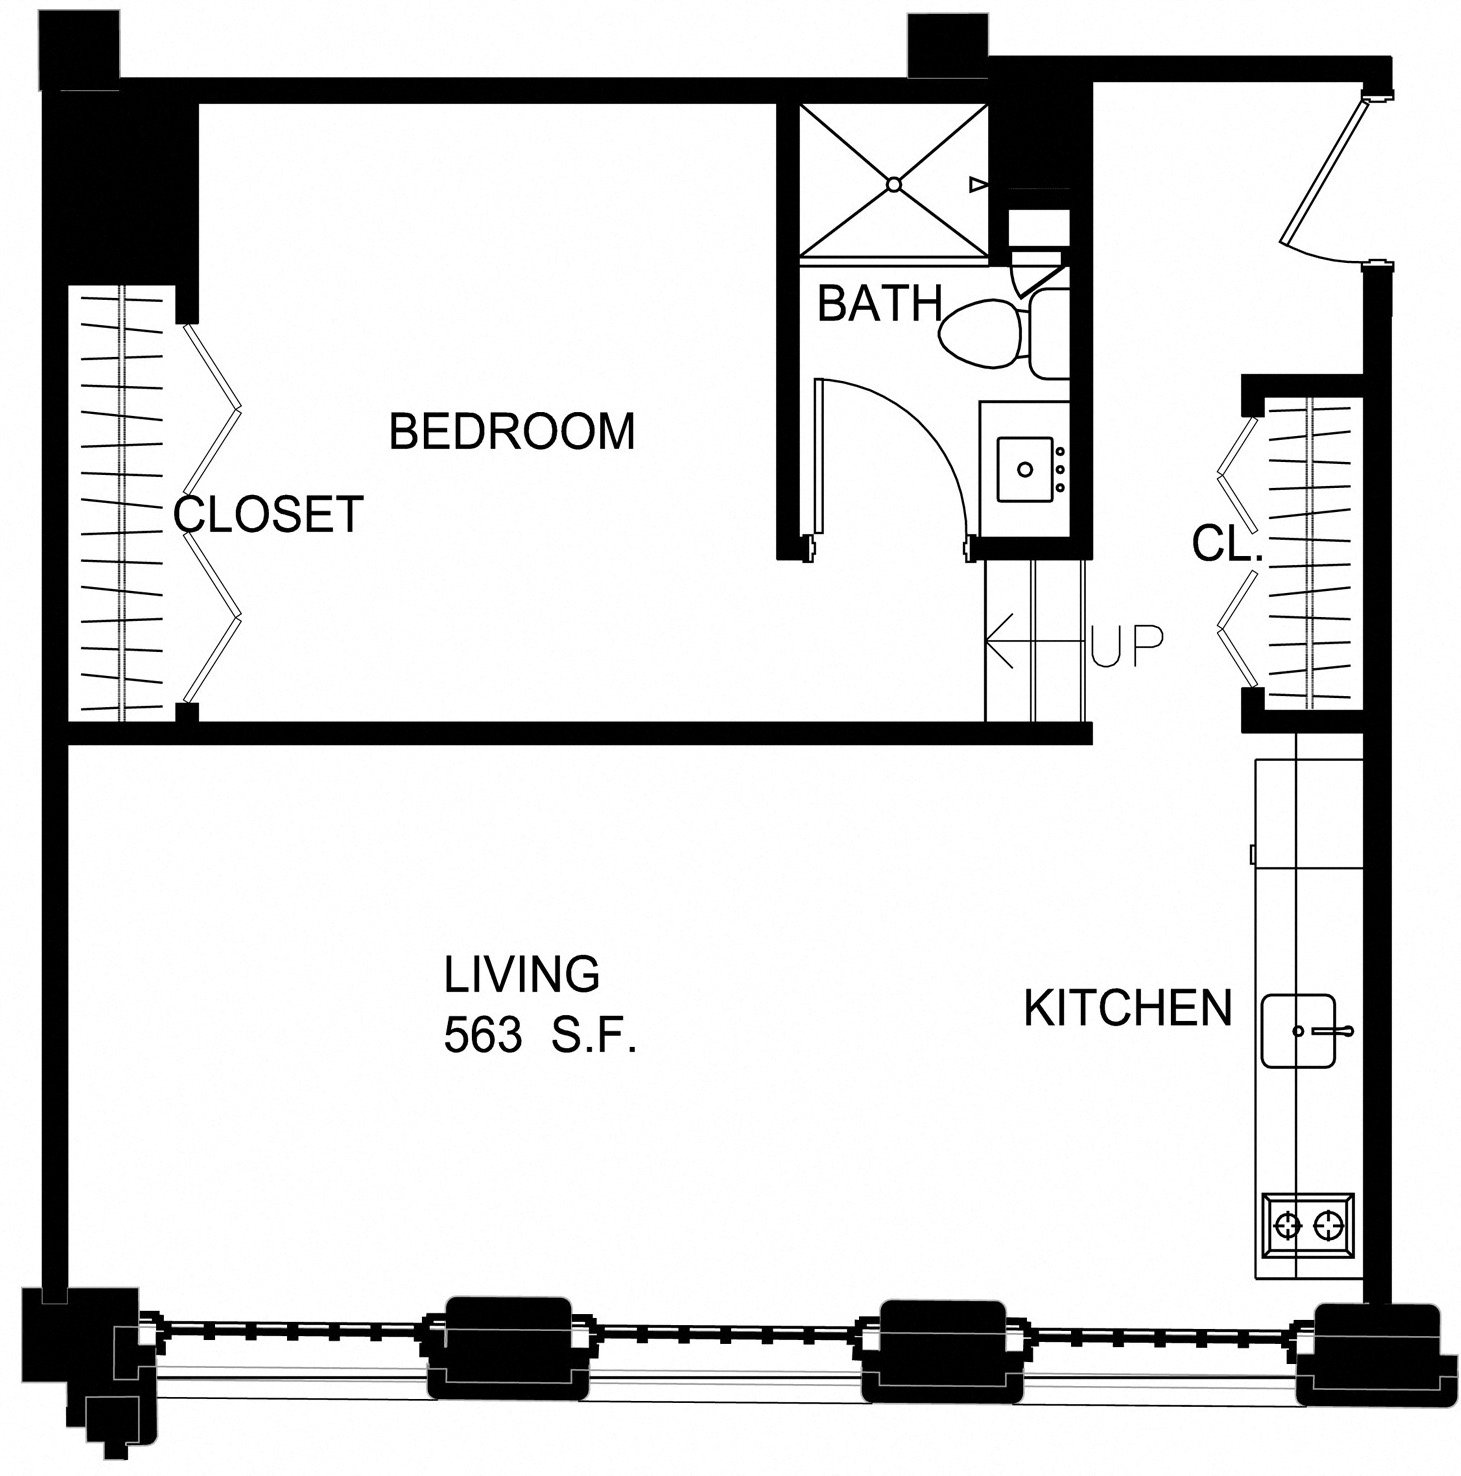 Floorplan for Apartment #S2113, 0 bedroom unit at Halstead Providence